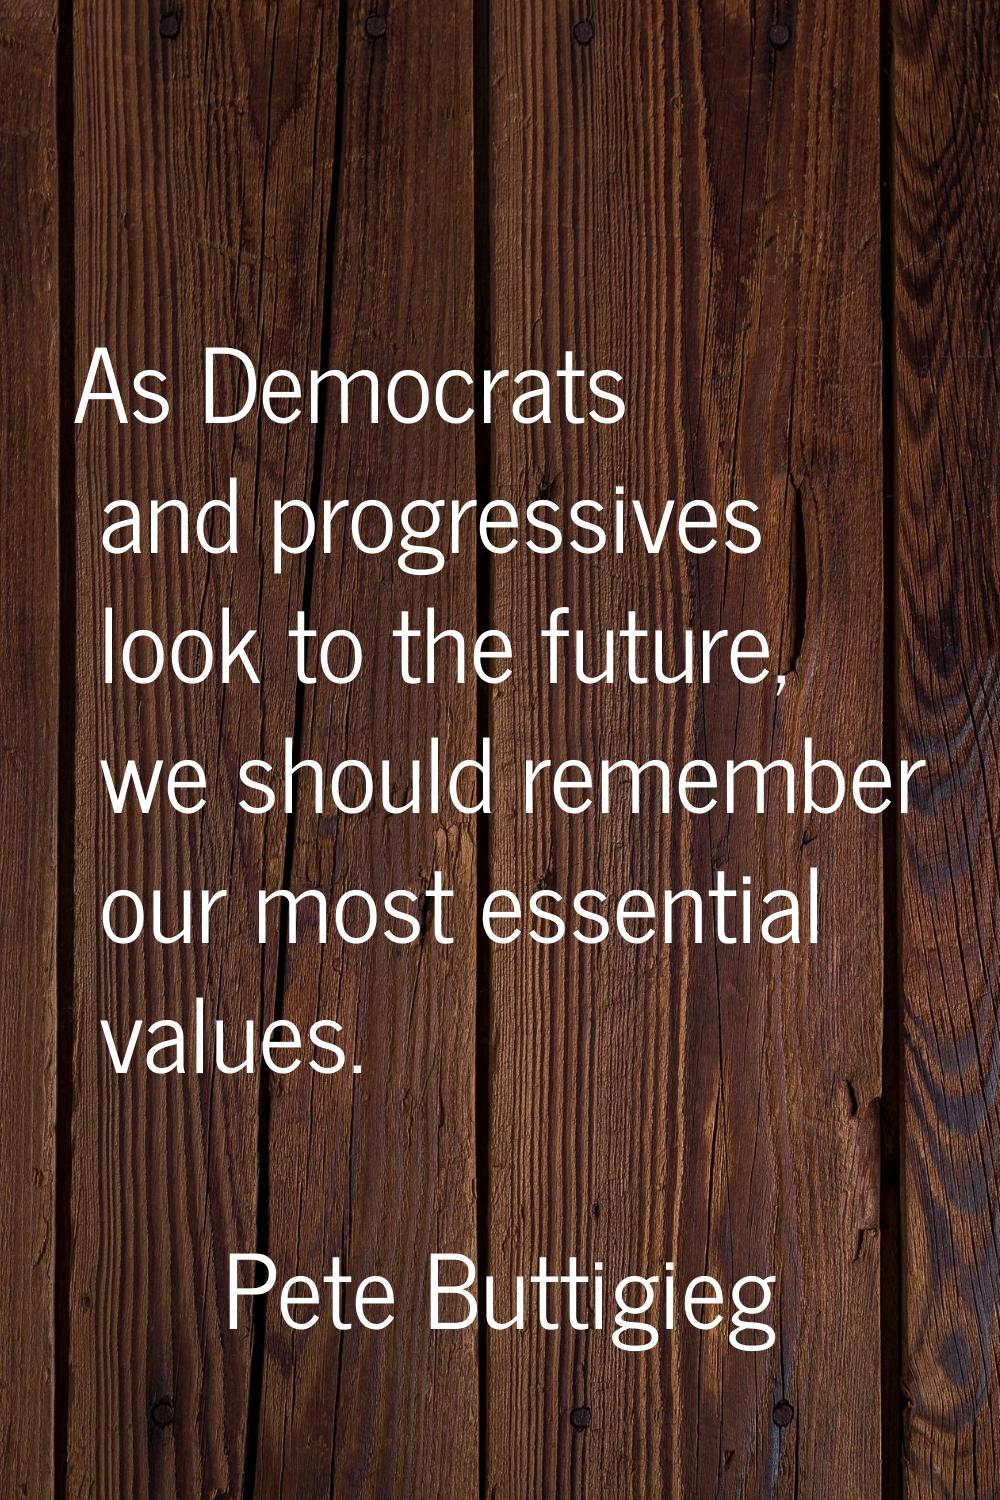 As Democrats and progressives look to the future, we should remember our most essential values.